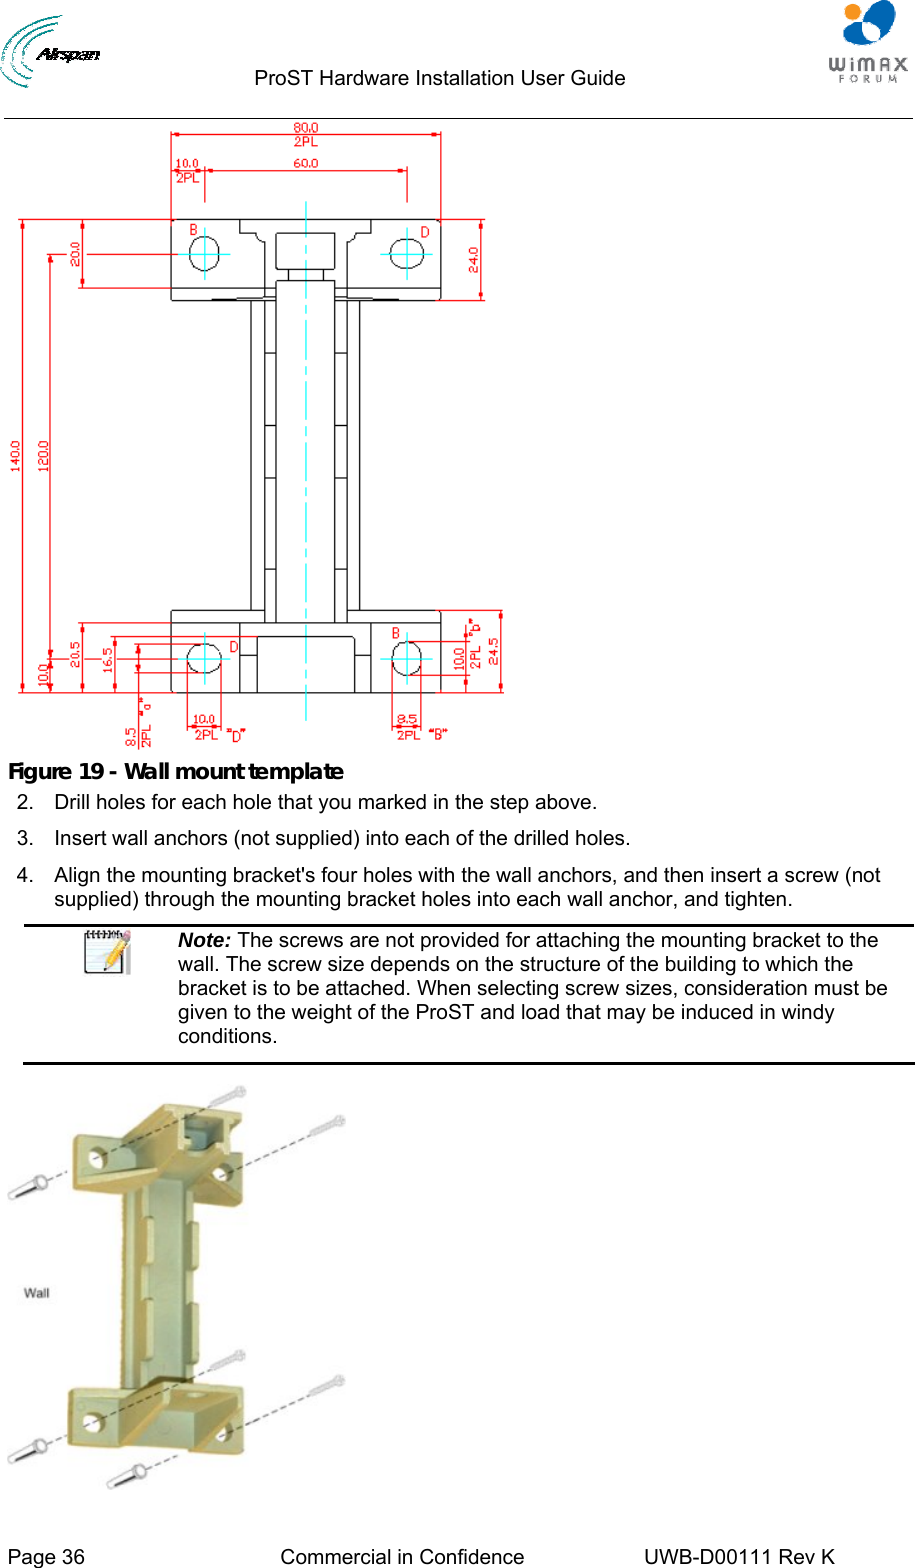                                  ProST Hardware Installation User Guide     Page 36  Commercial in Confidence  UWB-D00111 Rev K    Figure 19 - Wall mount template 2.  Drill holes for each hole that you marked in the step above. 3.  Insert wall anchors (not supplied) into each of the drilled holes. 4.  Align the mounting bracket&apos;s four holes with the wall anchors, and then insert a screw (not supplied) through the mounting bracket holes into each wall anchor, and tighten.  Note: The screws are not provided for attaching the mounting bracket to the wall. The screw size depends on the structure of the building to which the bracket is to be attached. When selecting screw sizes, consideration must be given to the weight of the ProST and load that may be induced in windy conditions.   